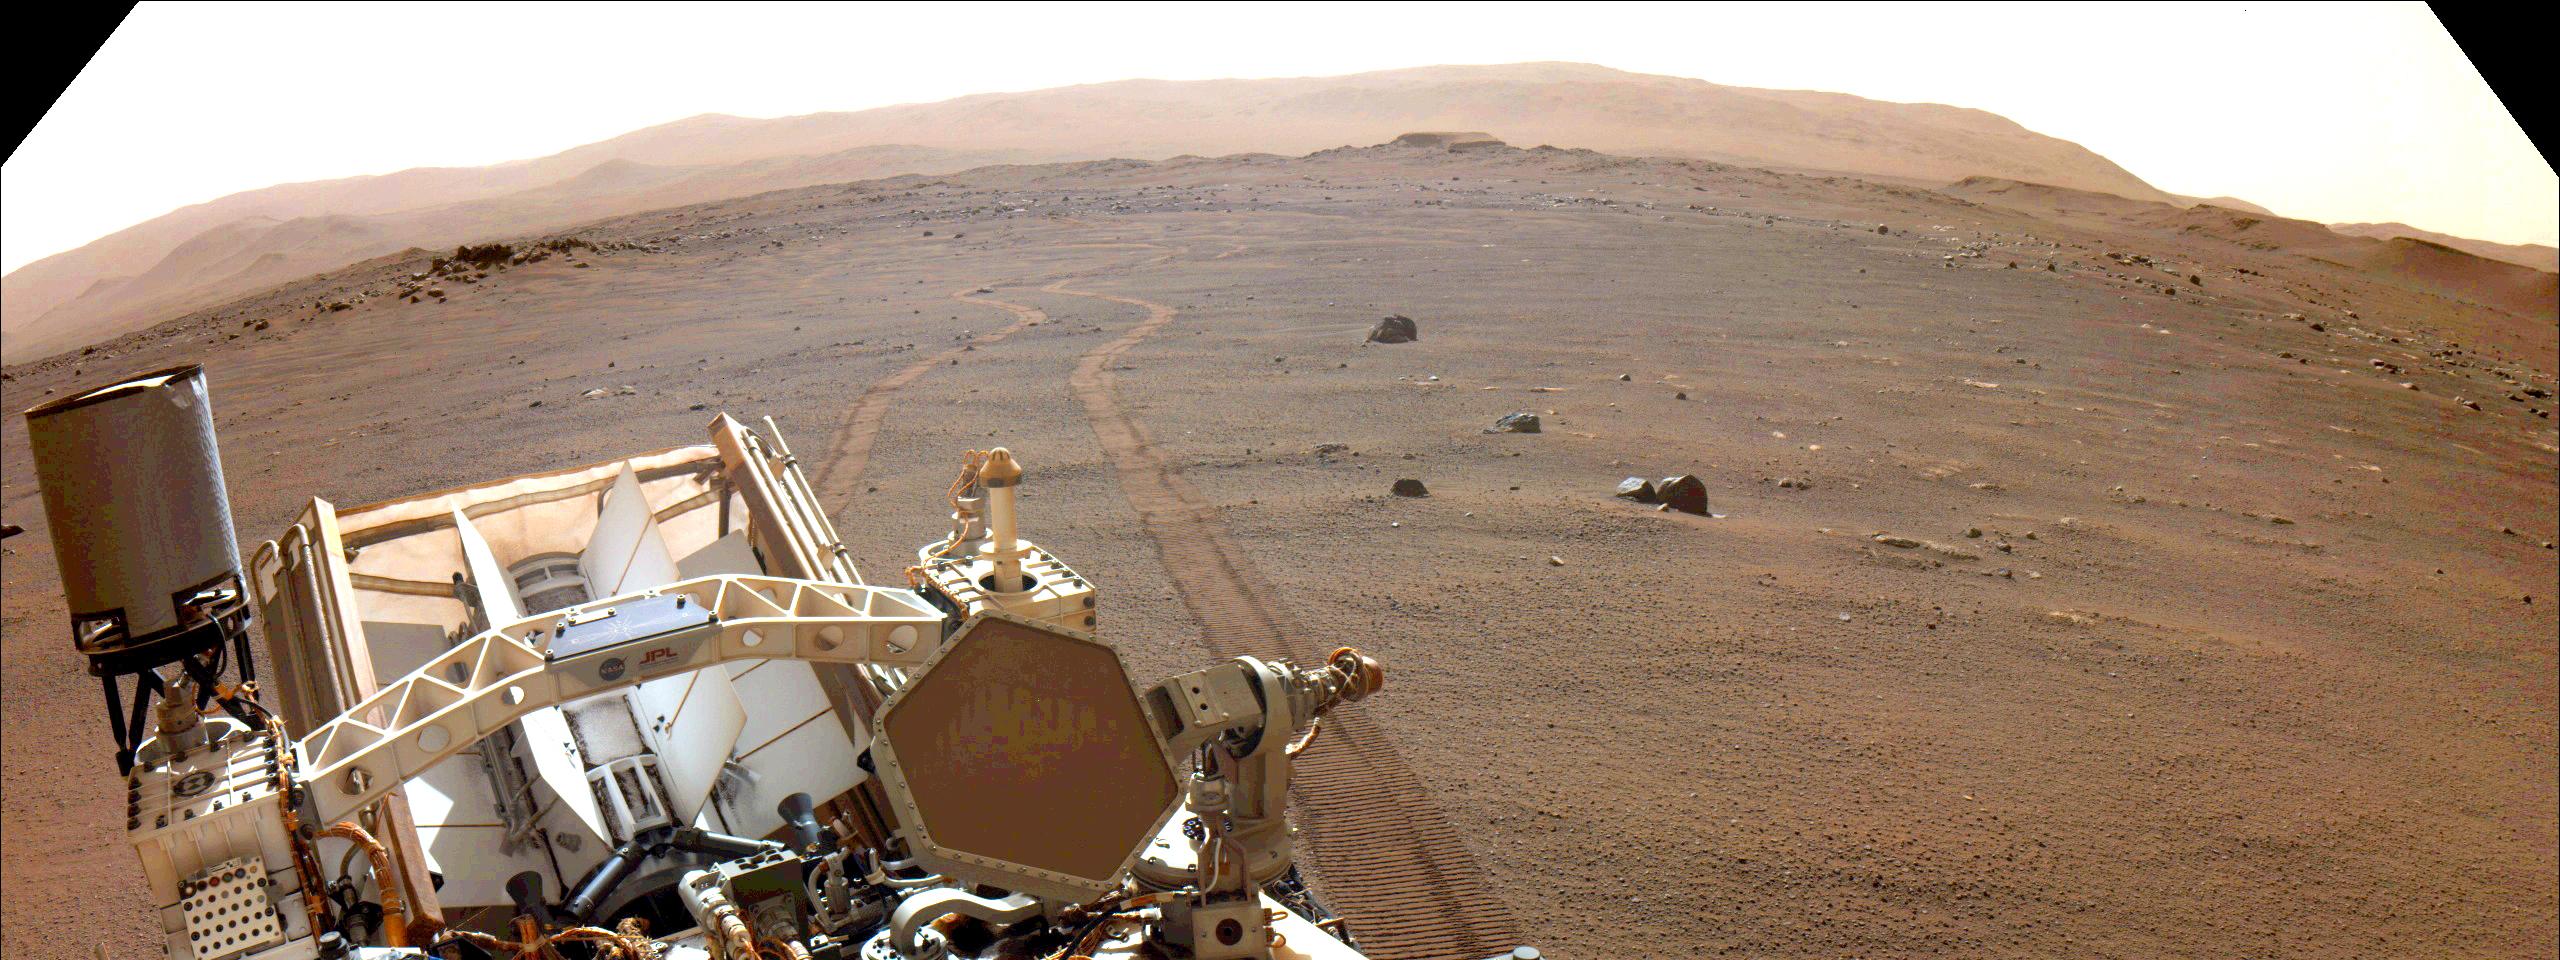 Twin wheel tracks extend to the horizon in this view over the back of the rover.